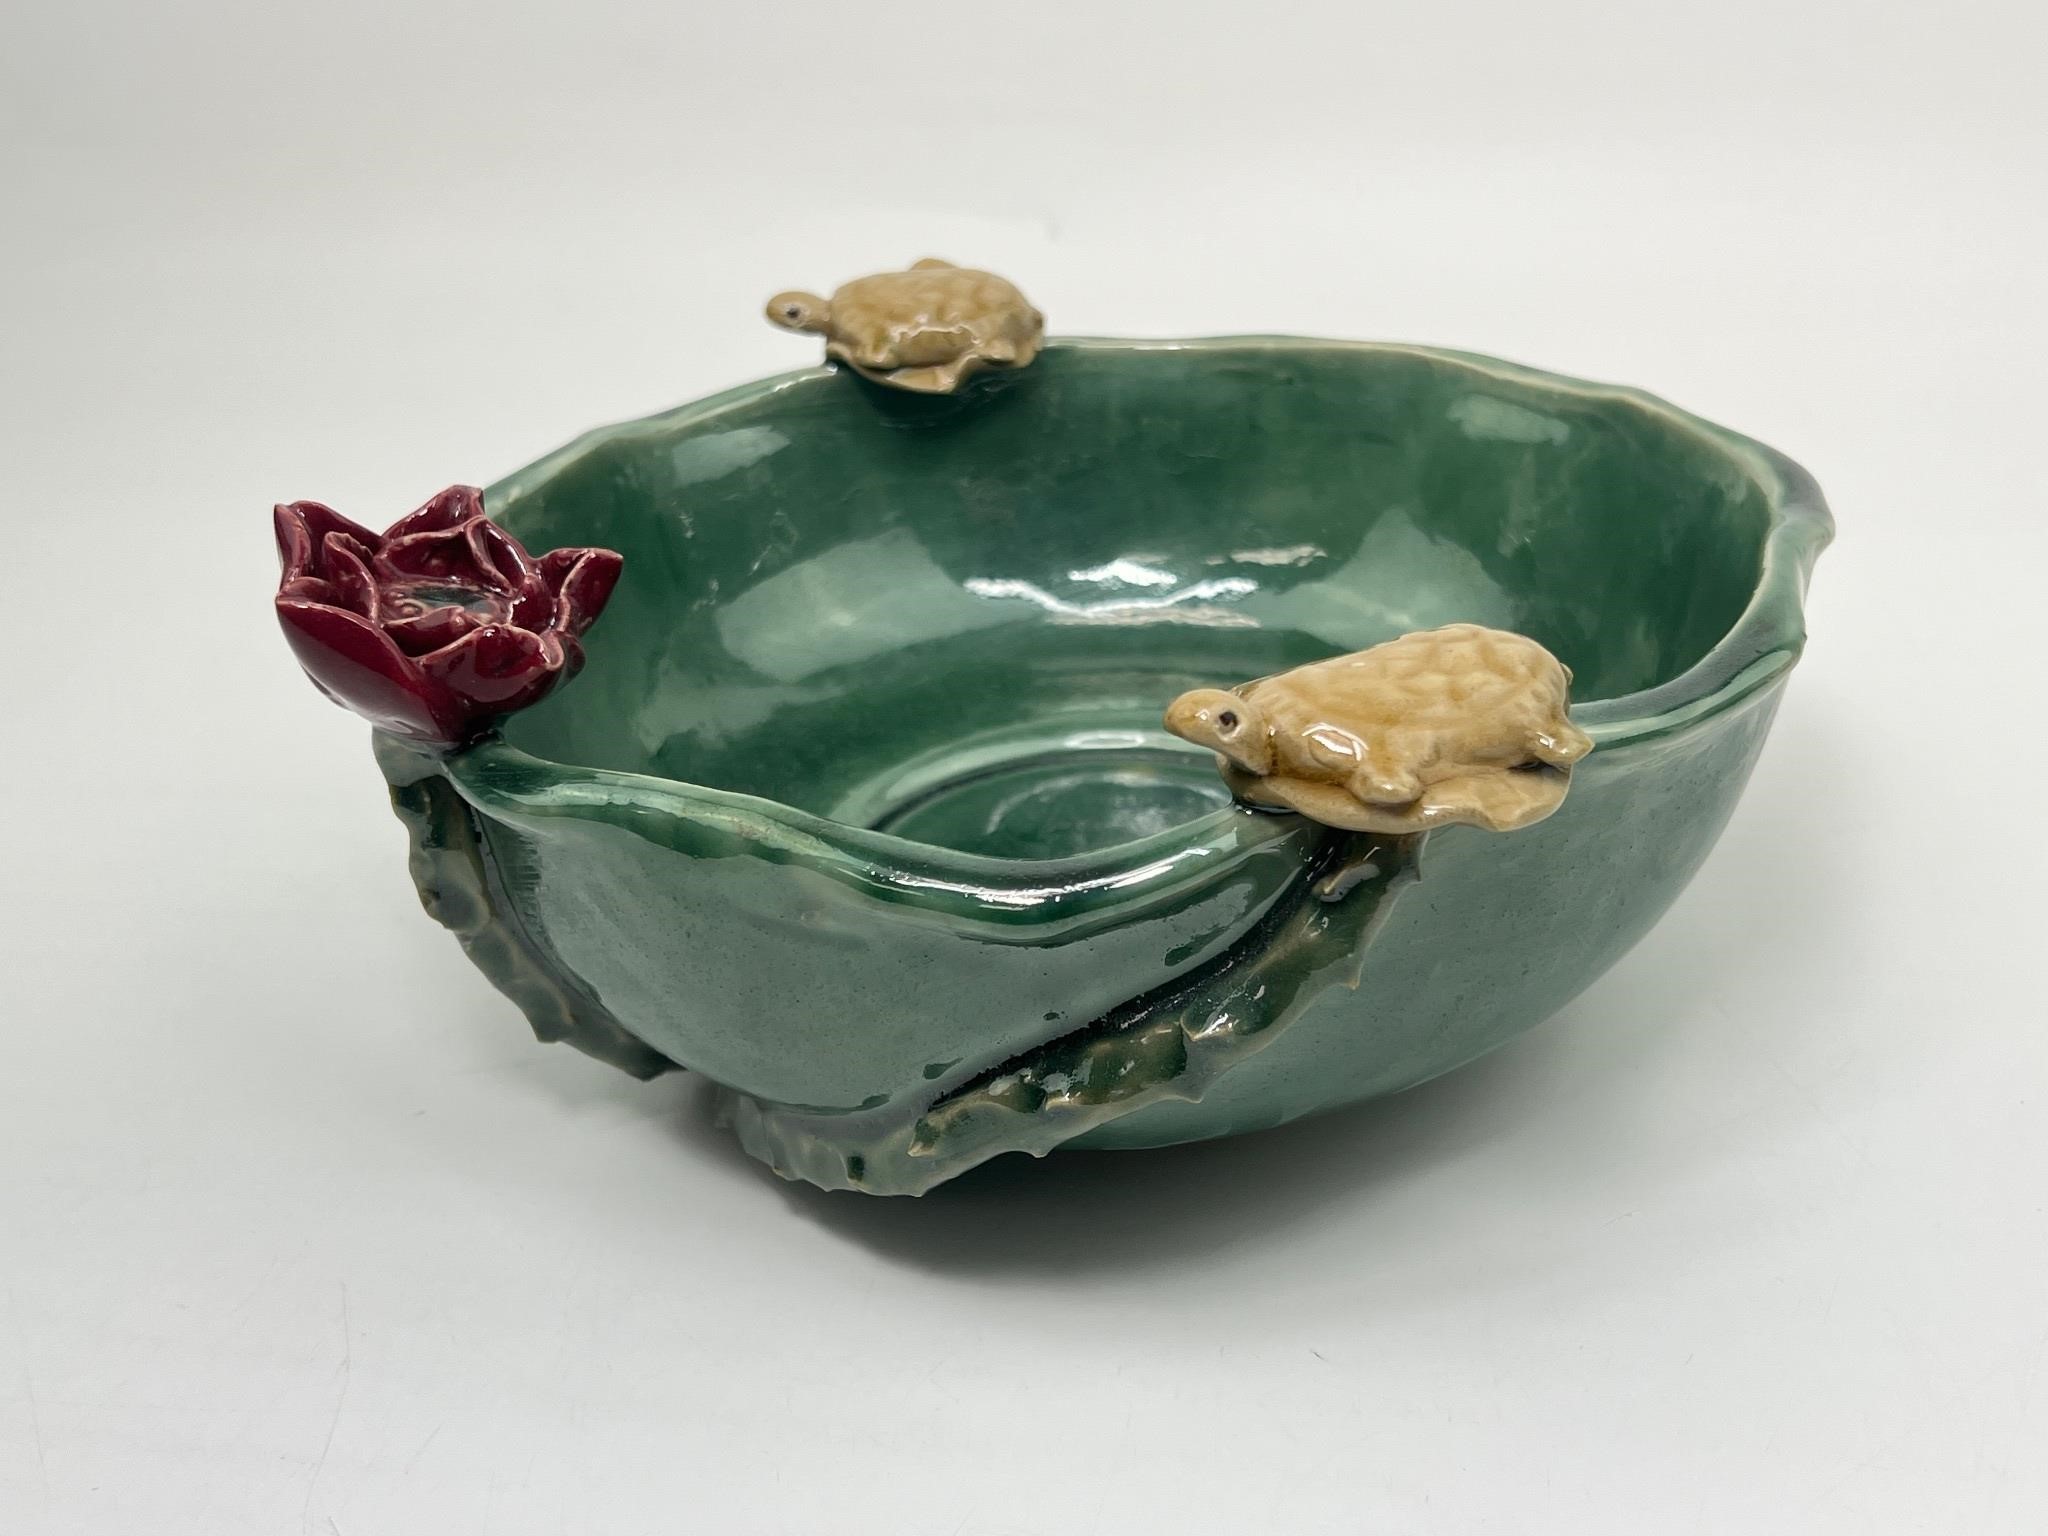 Glazed Pottery Bowl with Turtles